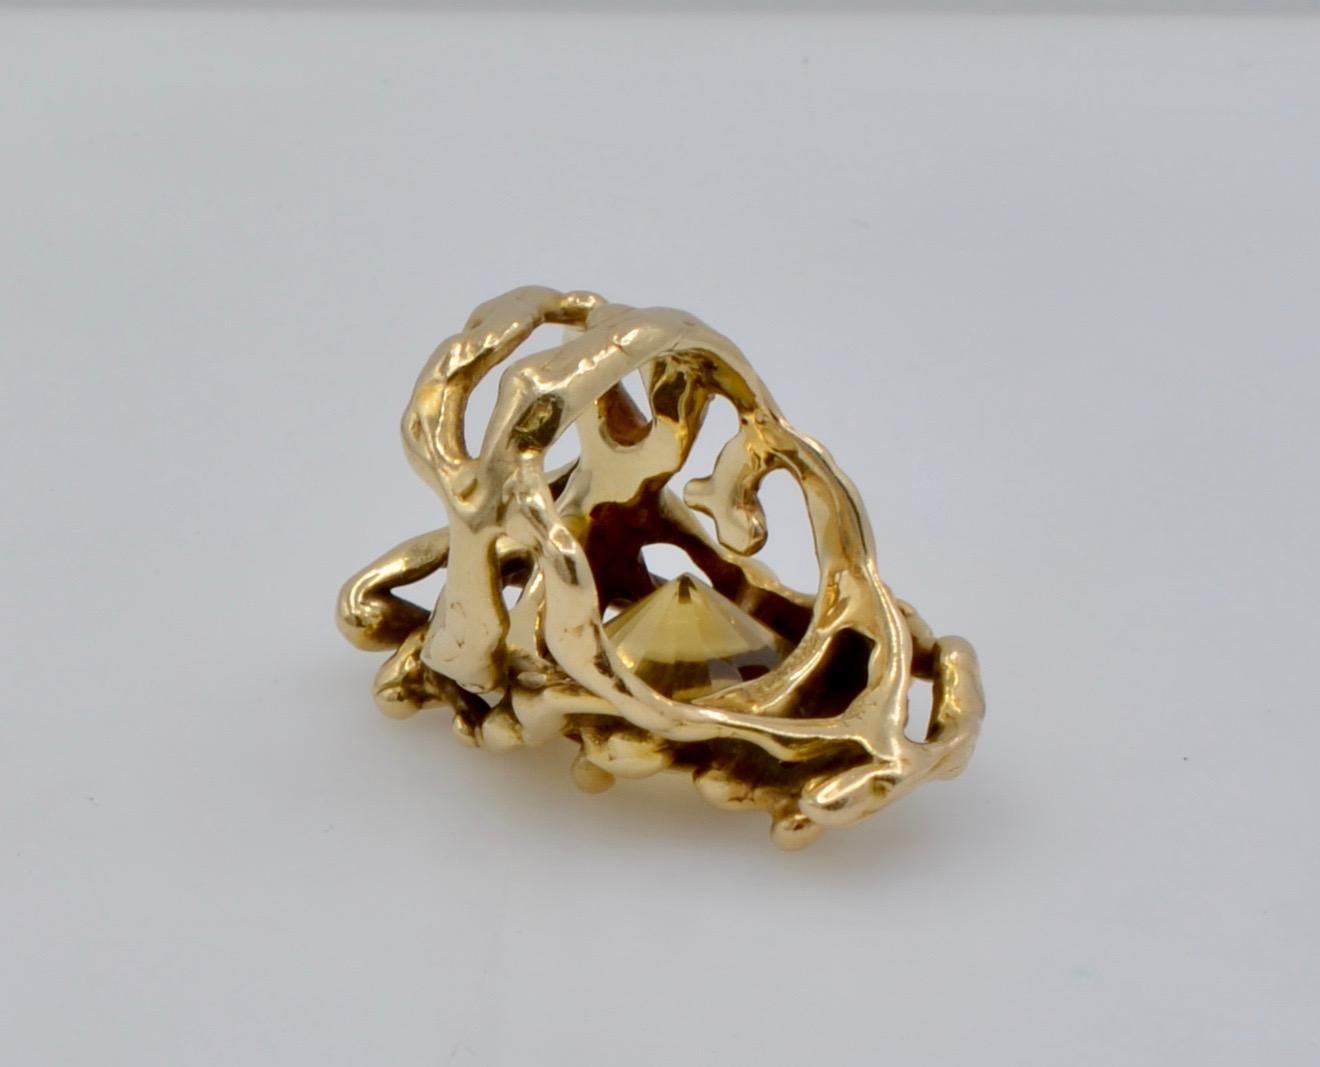 This amazing organic ring was designed and made by the Monterey, California Designer Dorian Graboswki. The 7.25 ct citrine is set in 14k gold freeform branches that intertwine with three dimensional movement . The many tendrils of the beaches